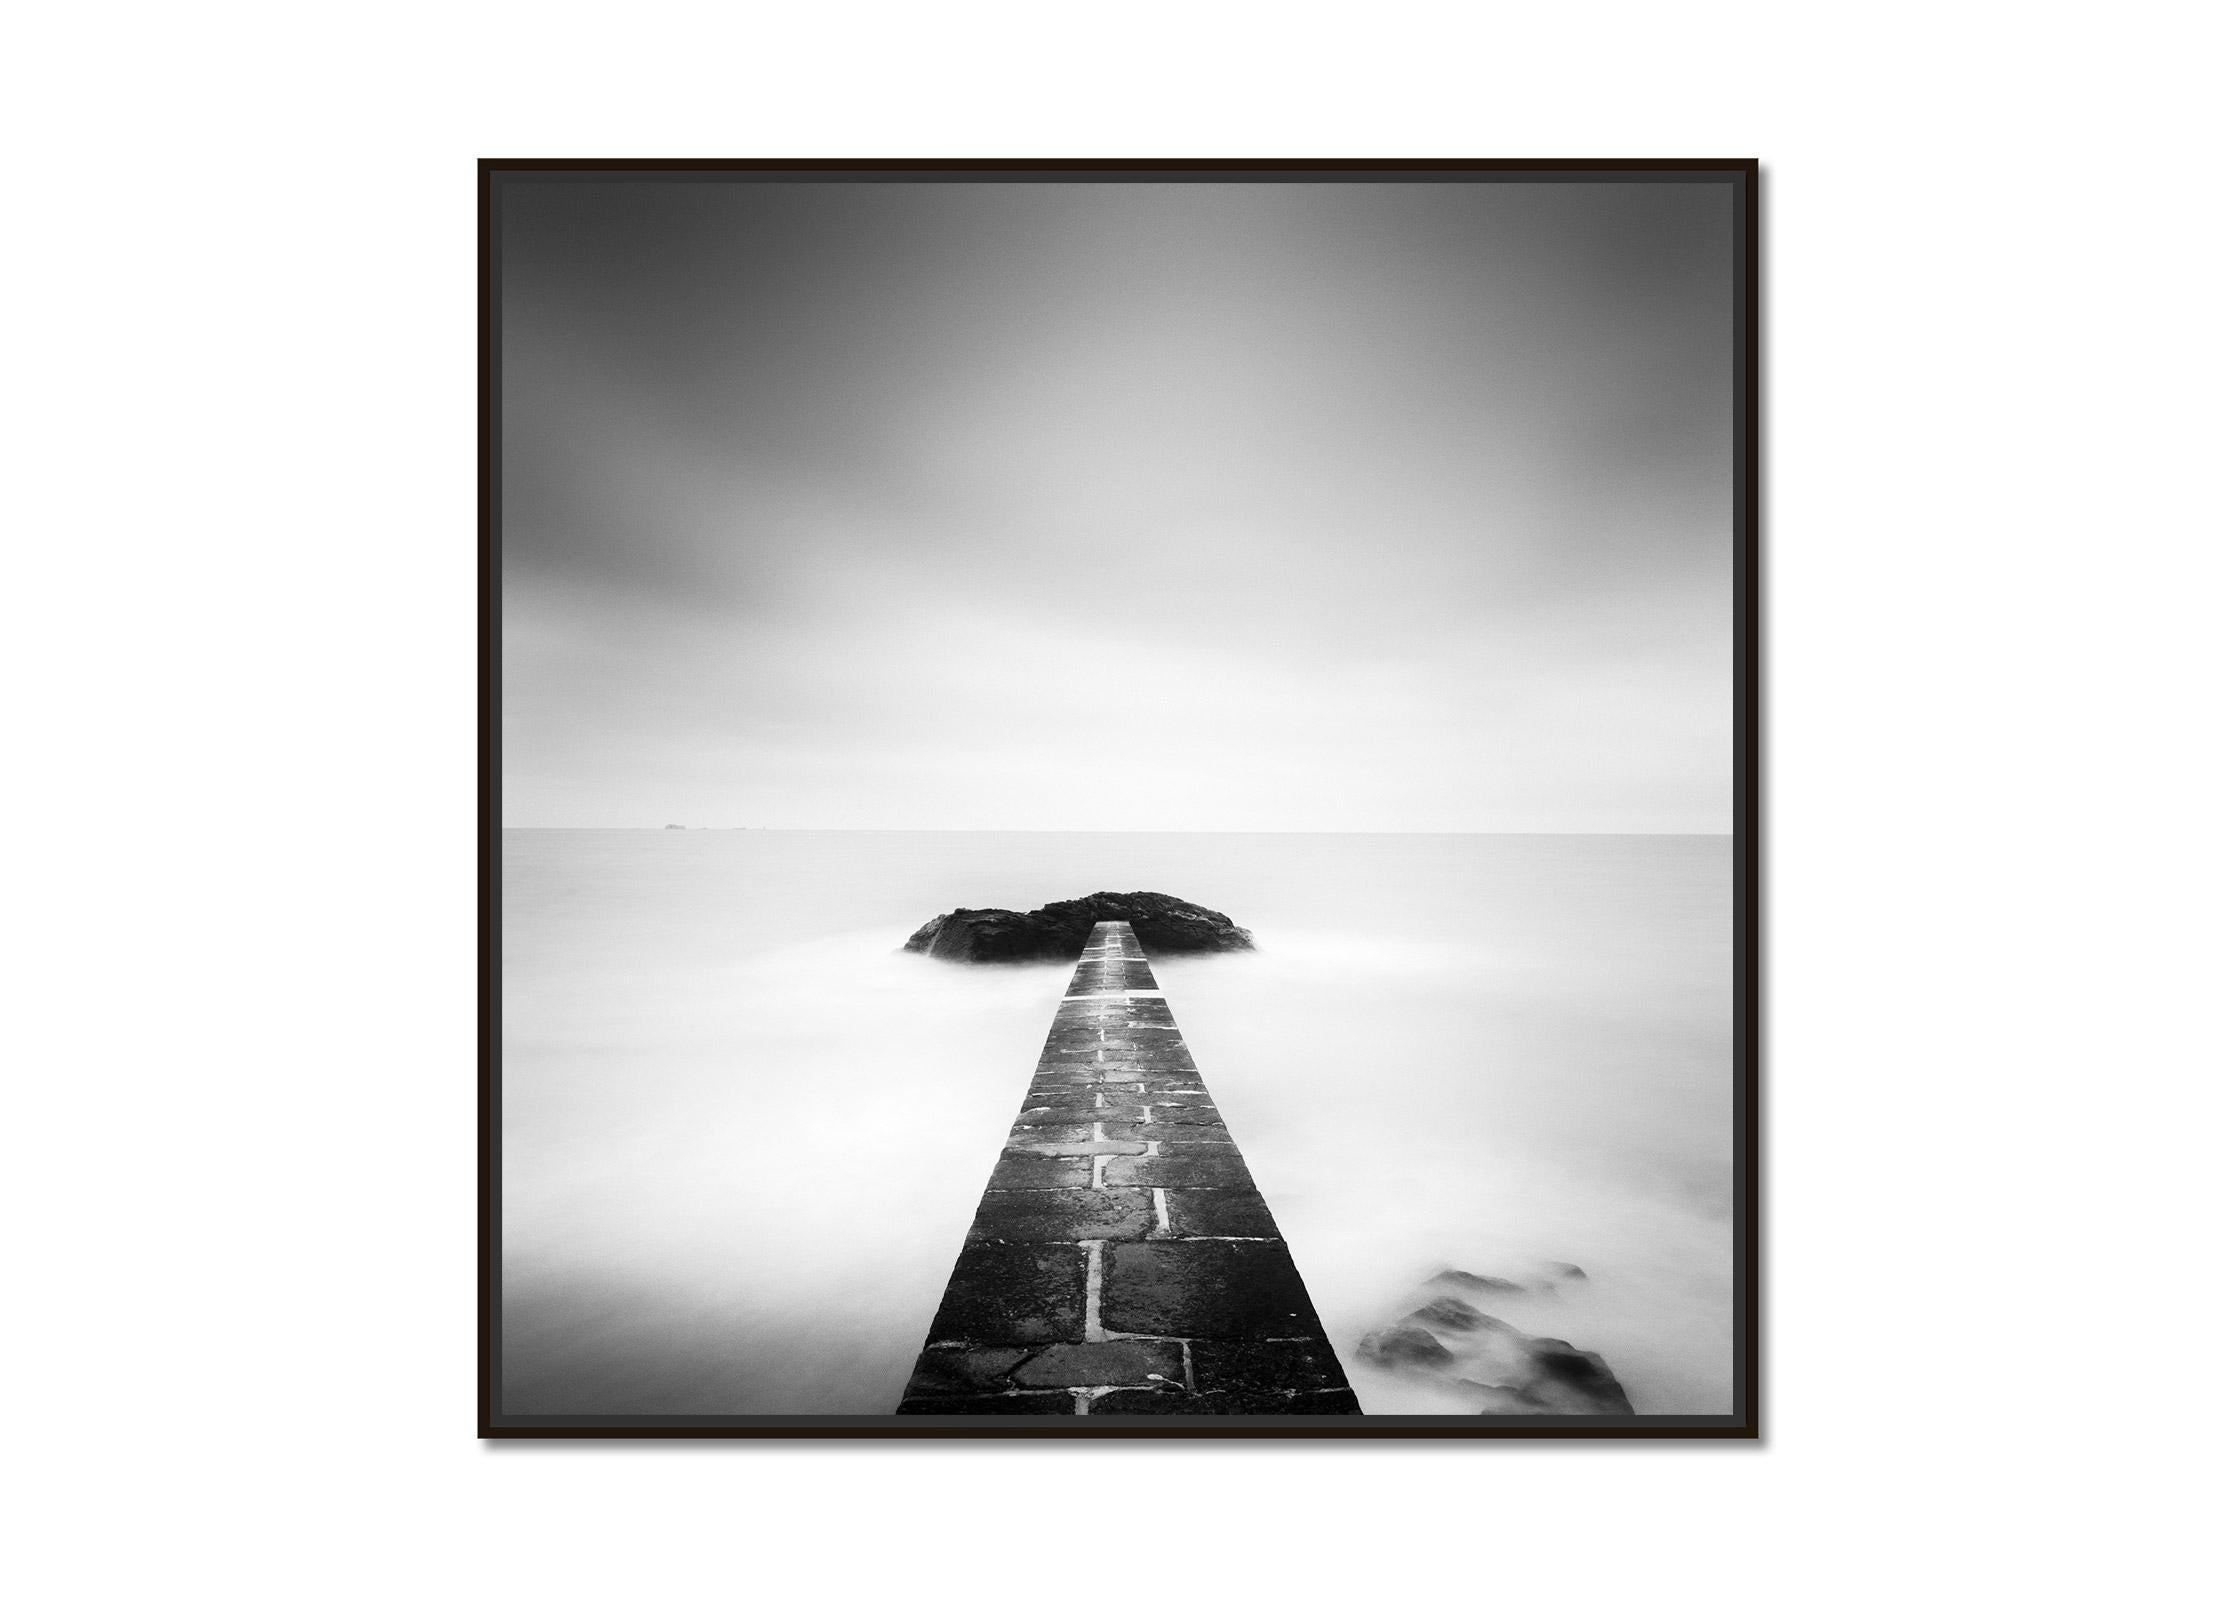 Black End, Normandy, France, minimalist black and white photography, landscape - Photograph by Gerald Berghammer